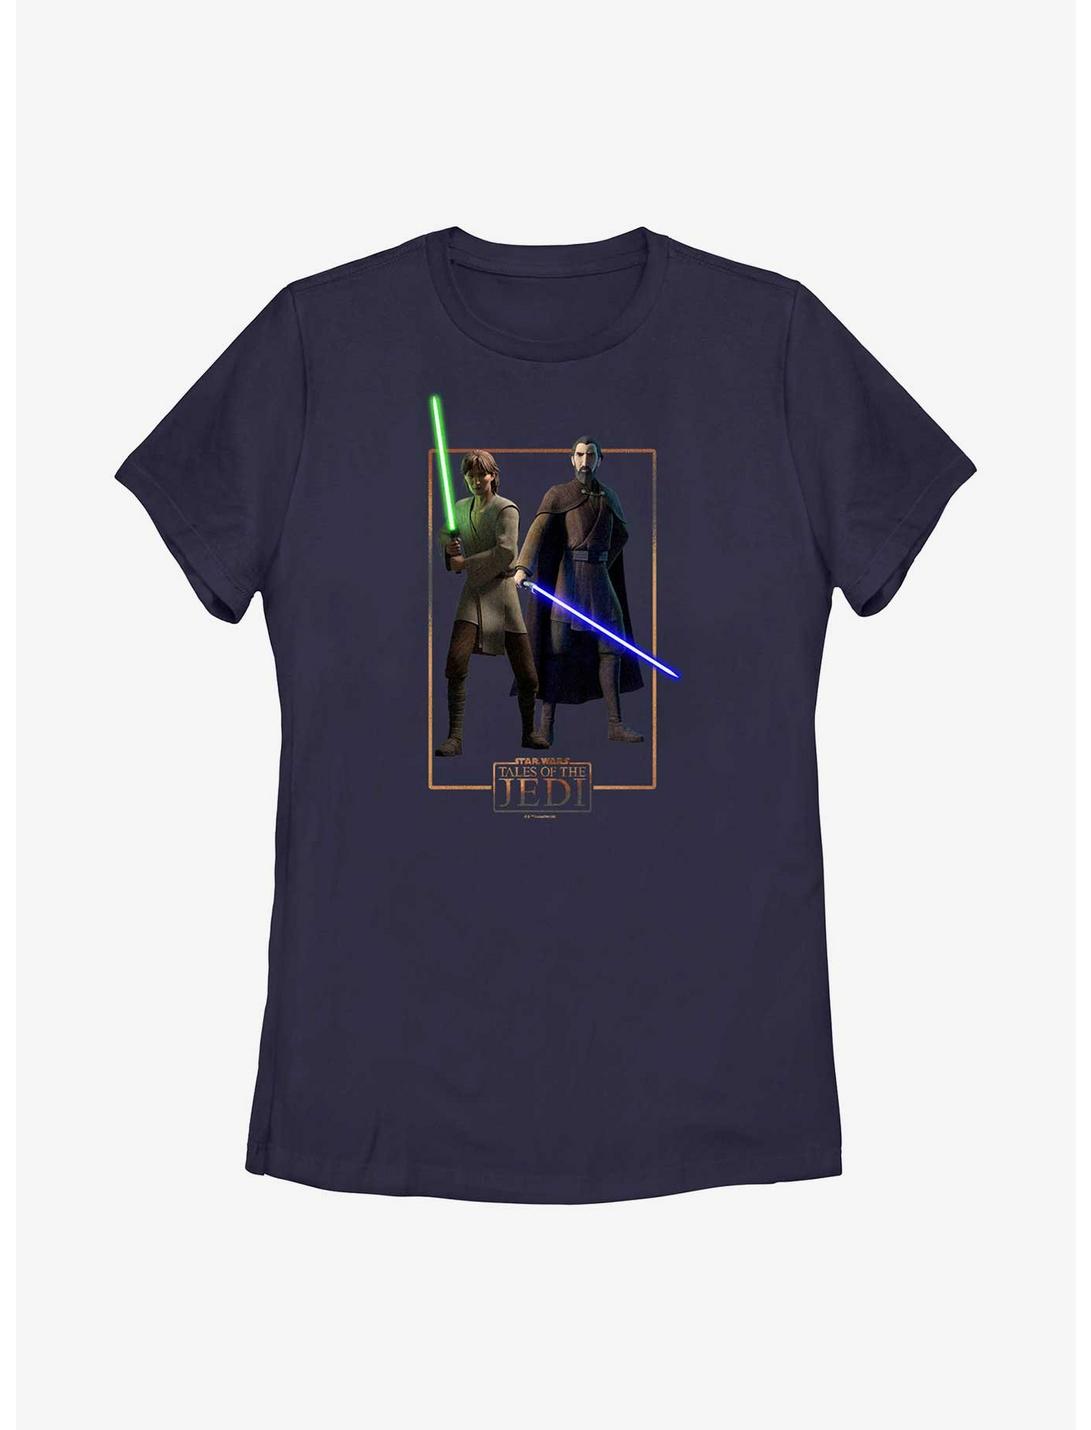 Star Wars: Tales of the Jedi Count Dooku and Qui-Gon Jinn Womens T-Shirt, NAVY, hi-res